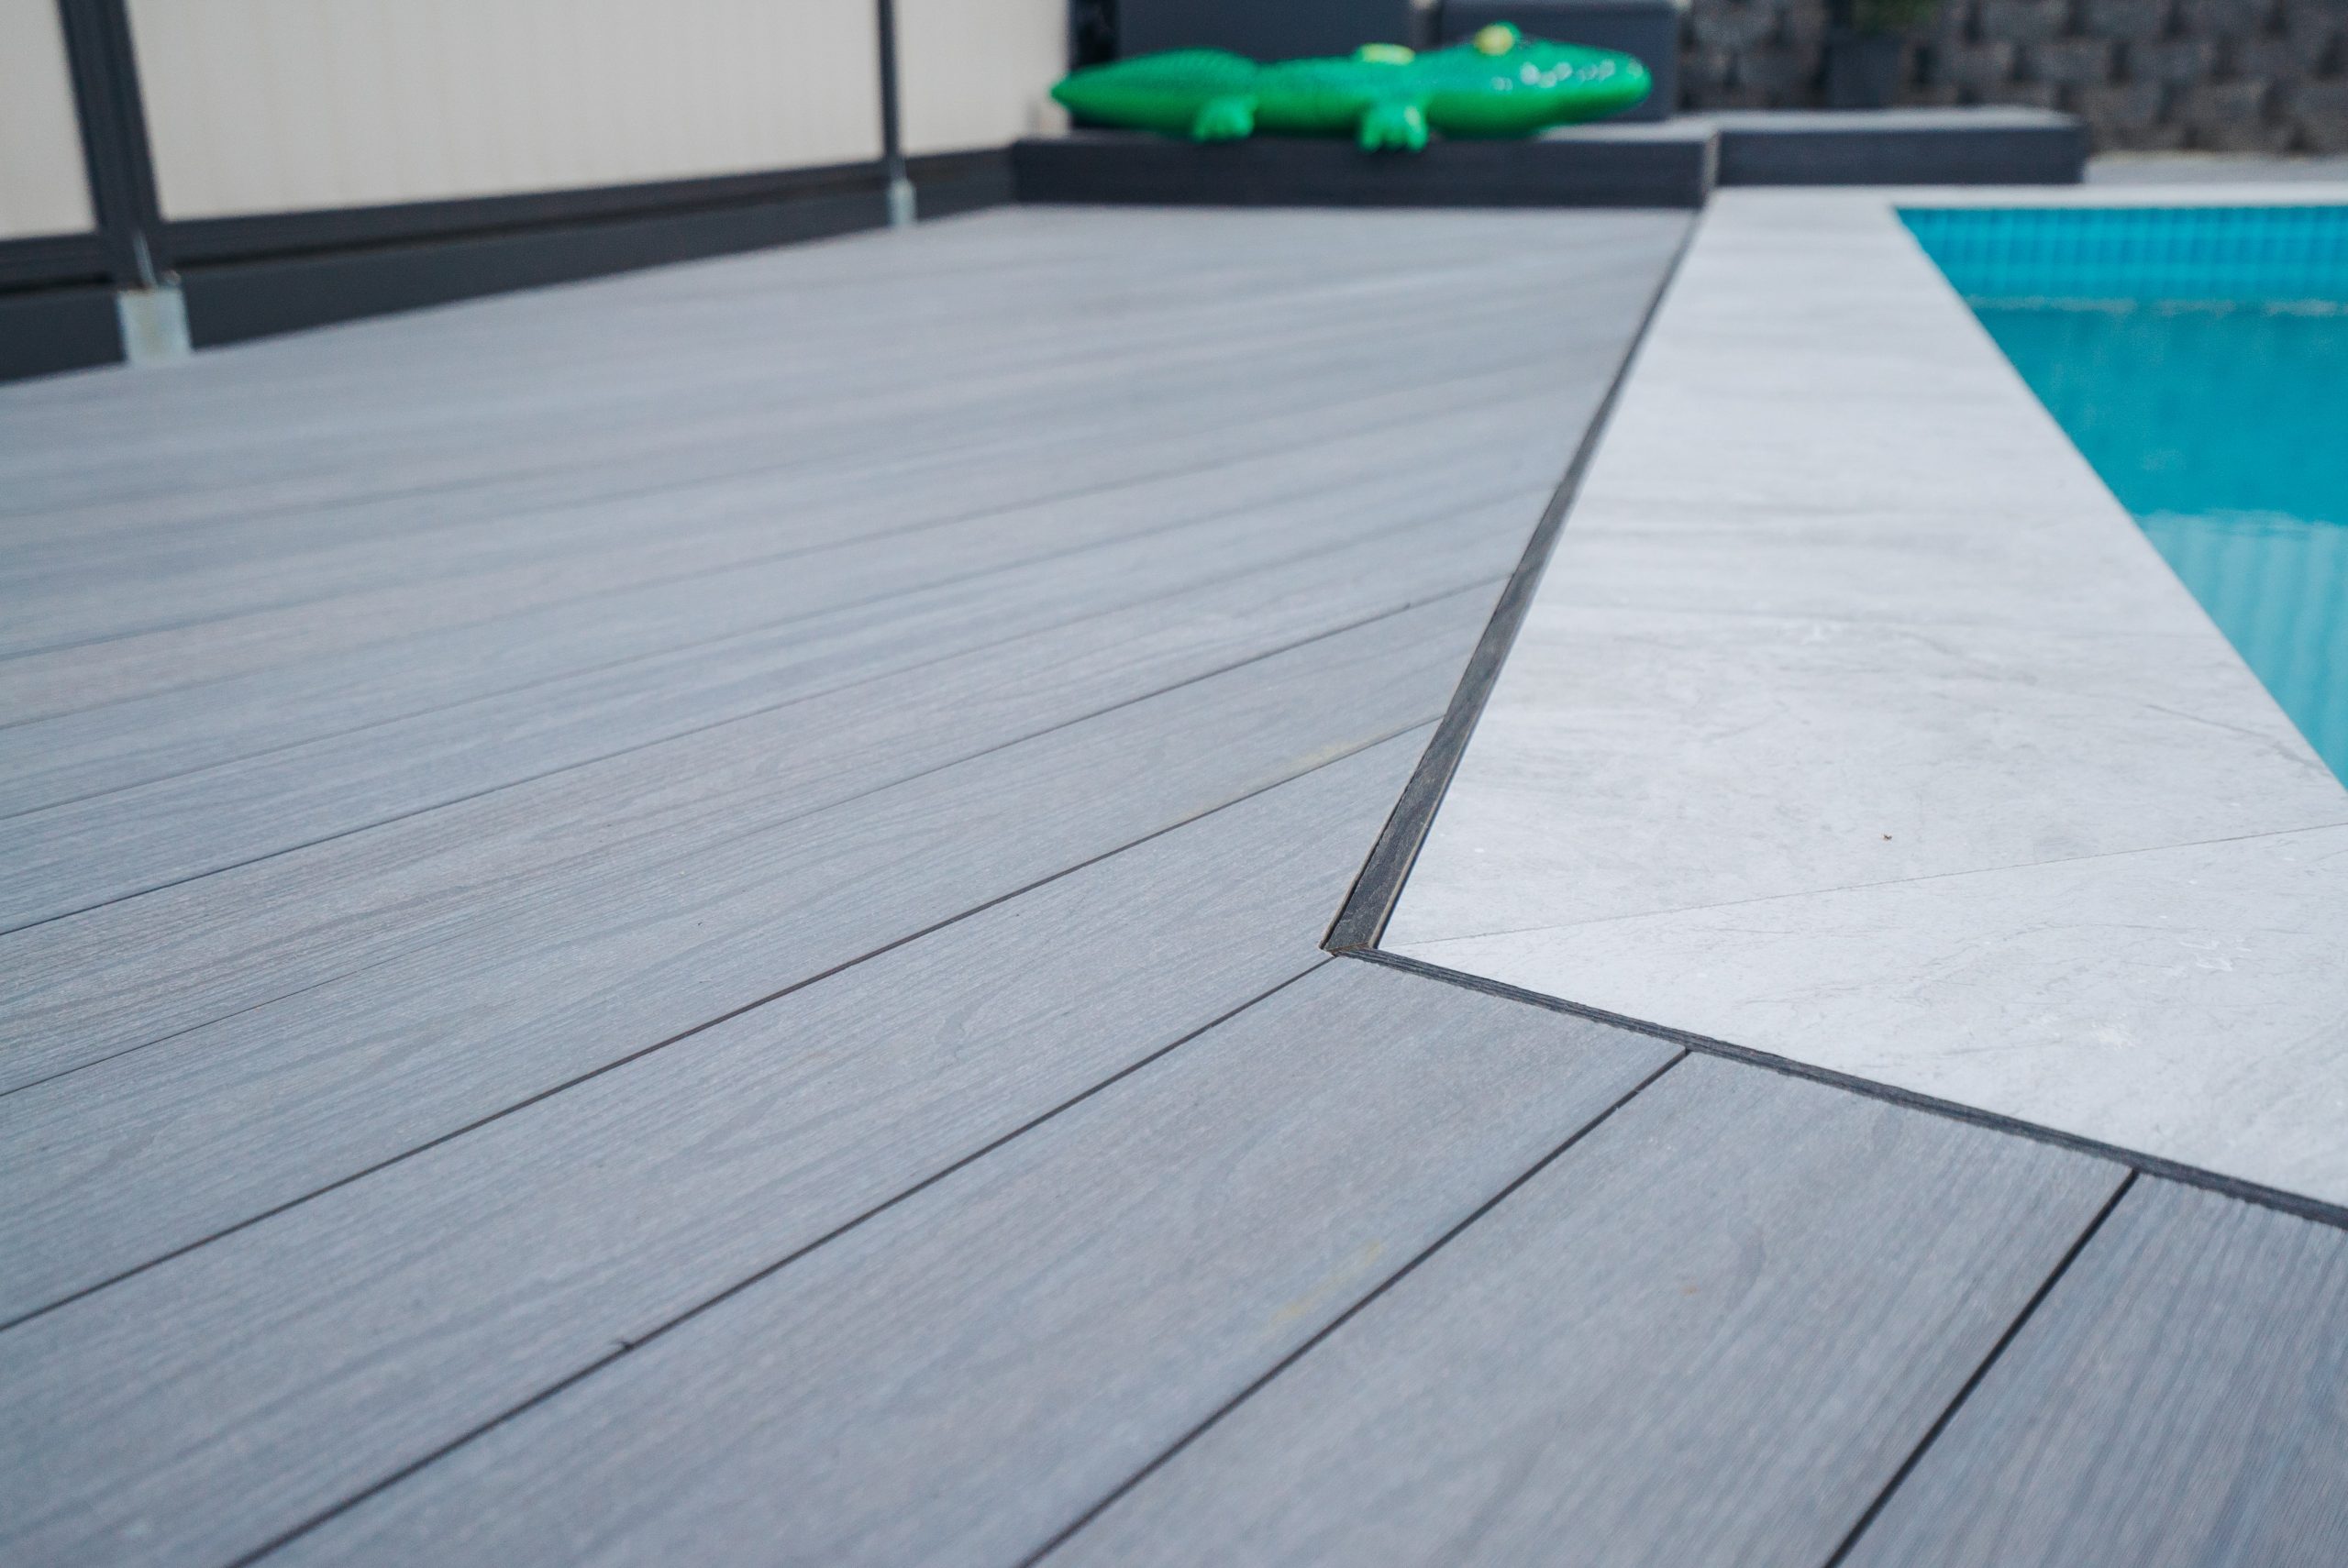 A triangle detail of Mountain ash composite decking boards